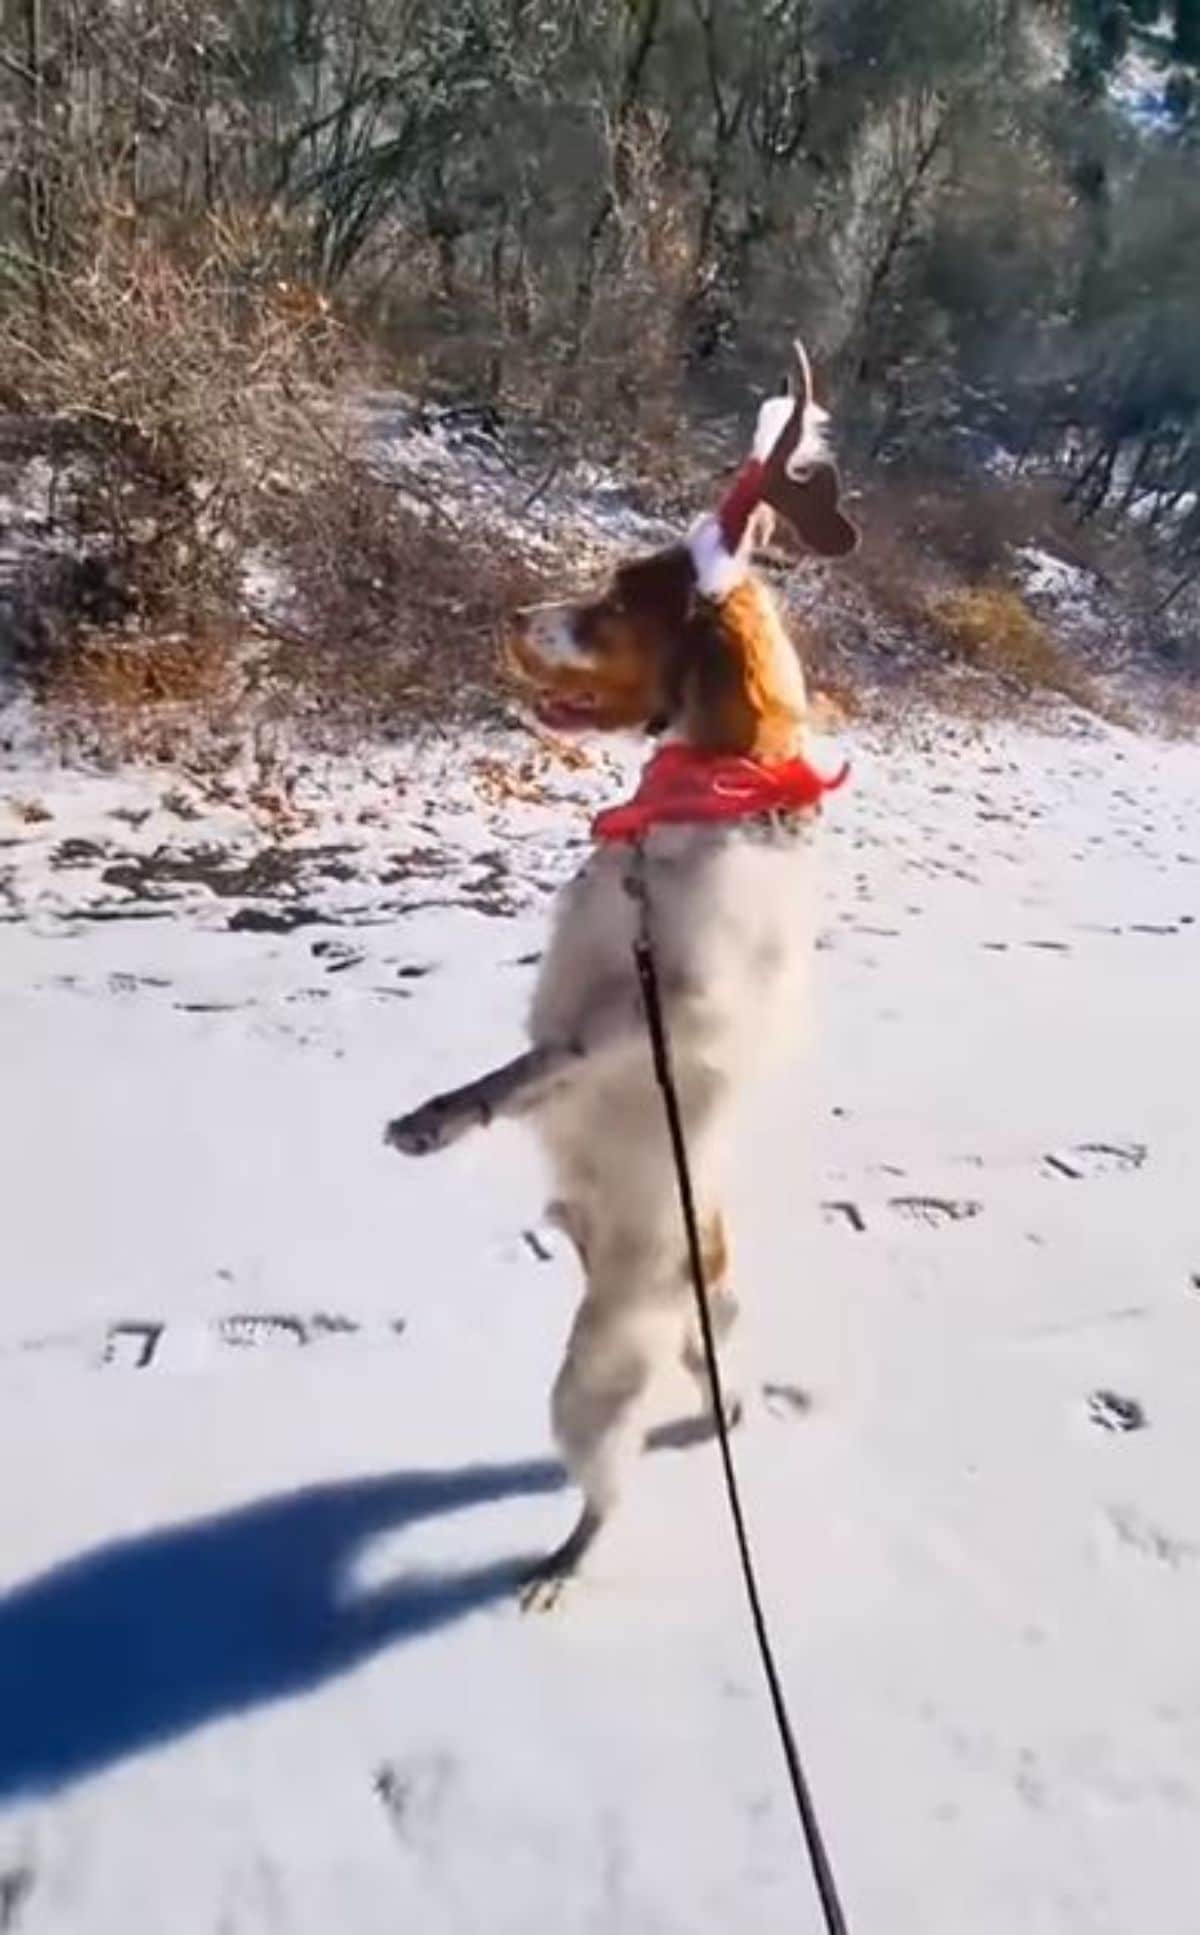 brown and white dog standing on hind legs on snow wearing a red bandan and being on a leash